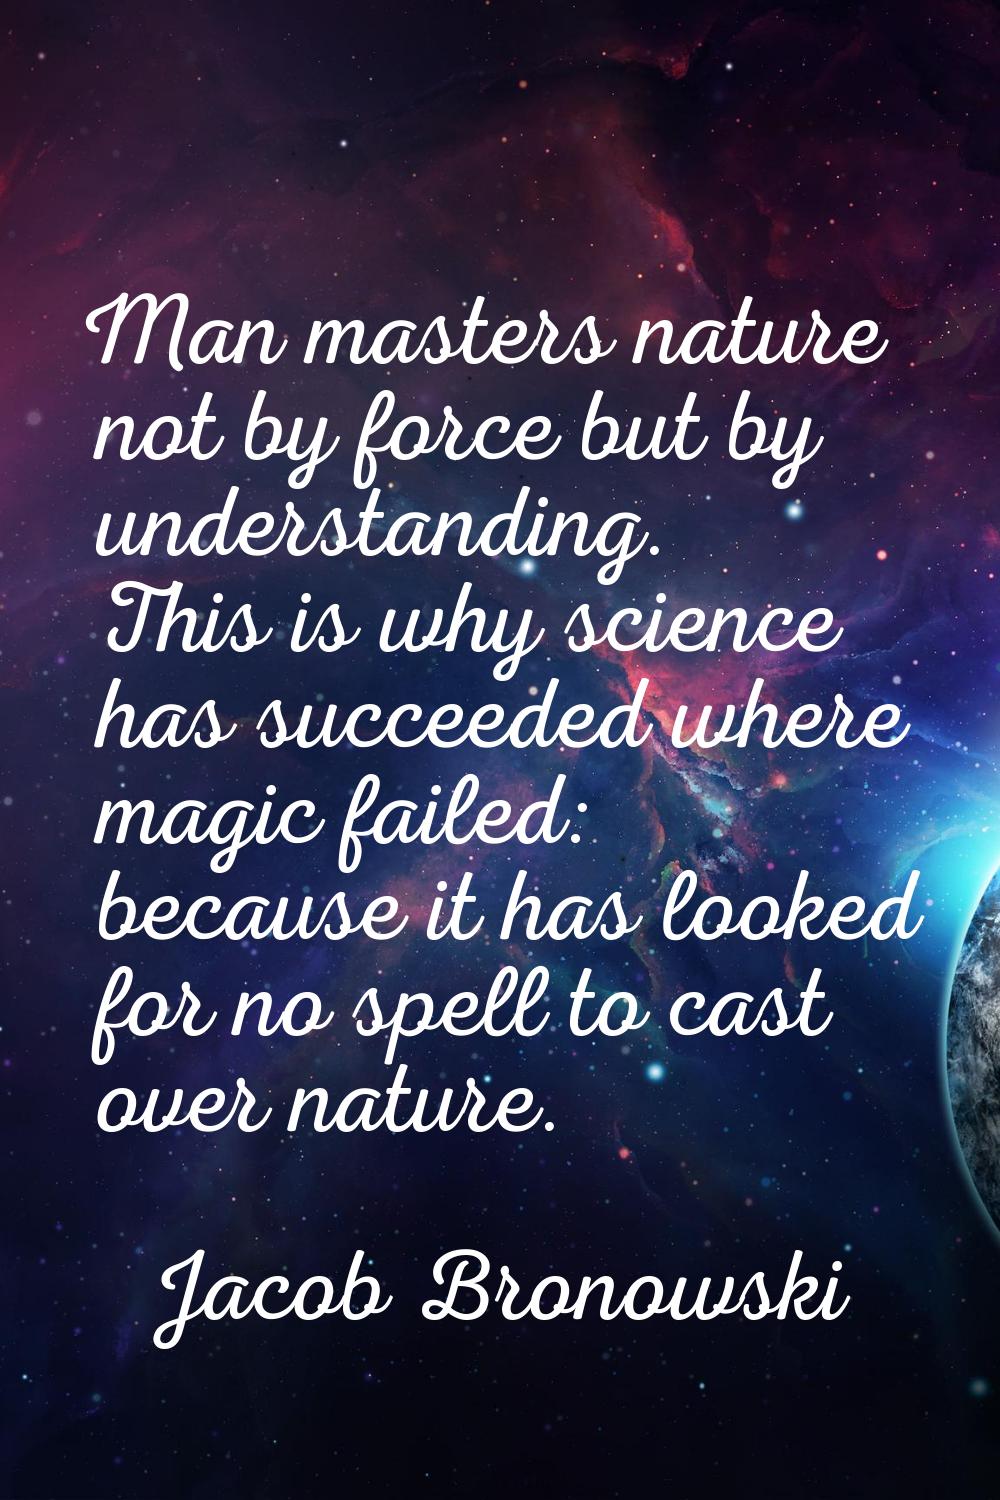 Man masters nature not by force but by understanding. This is why science has succeeded where magic